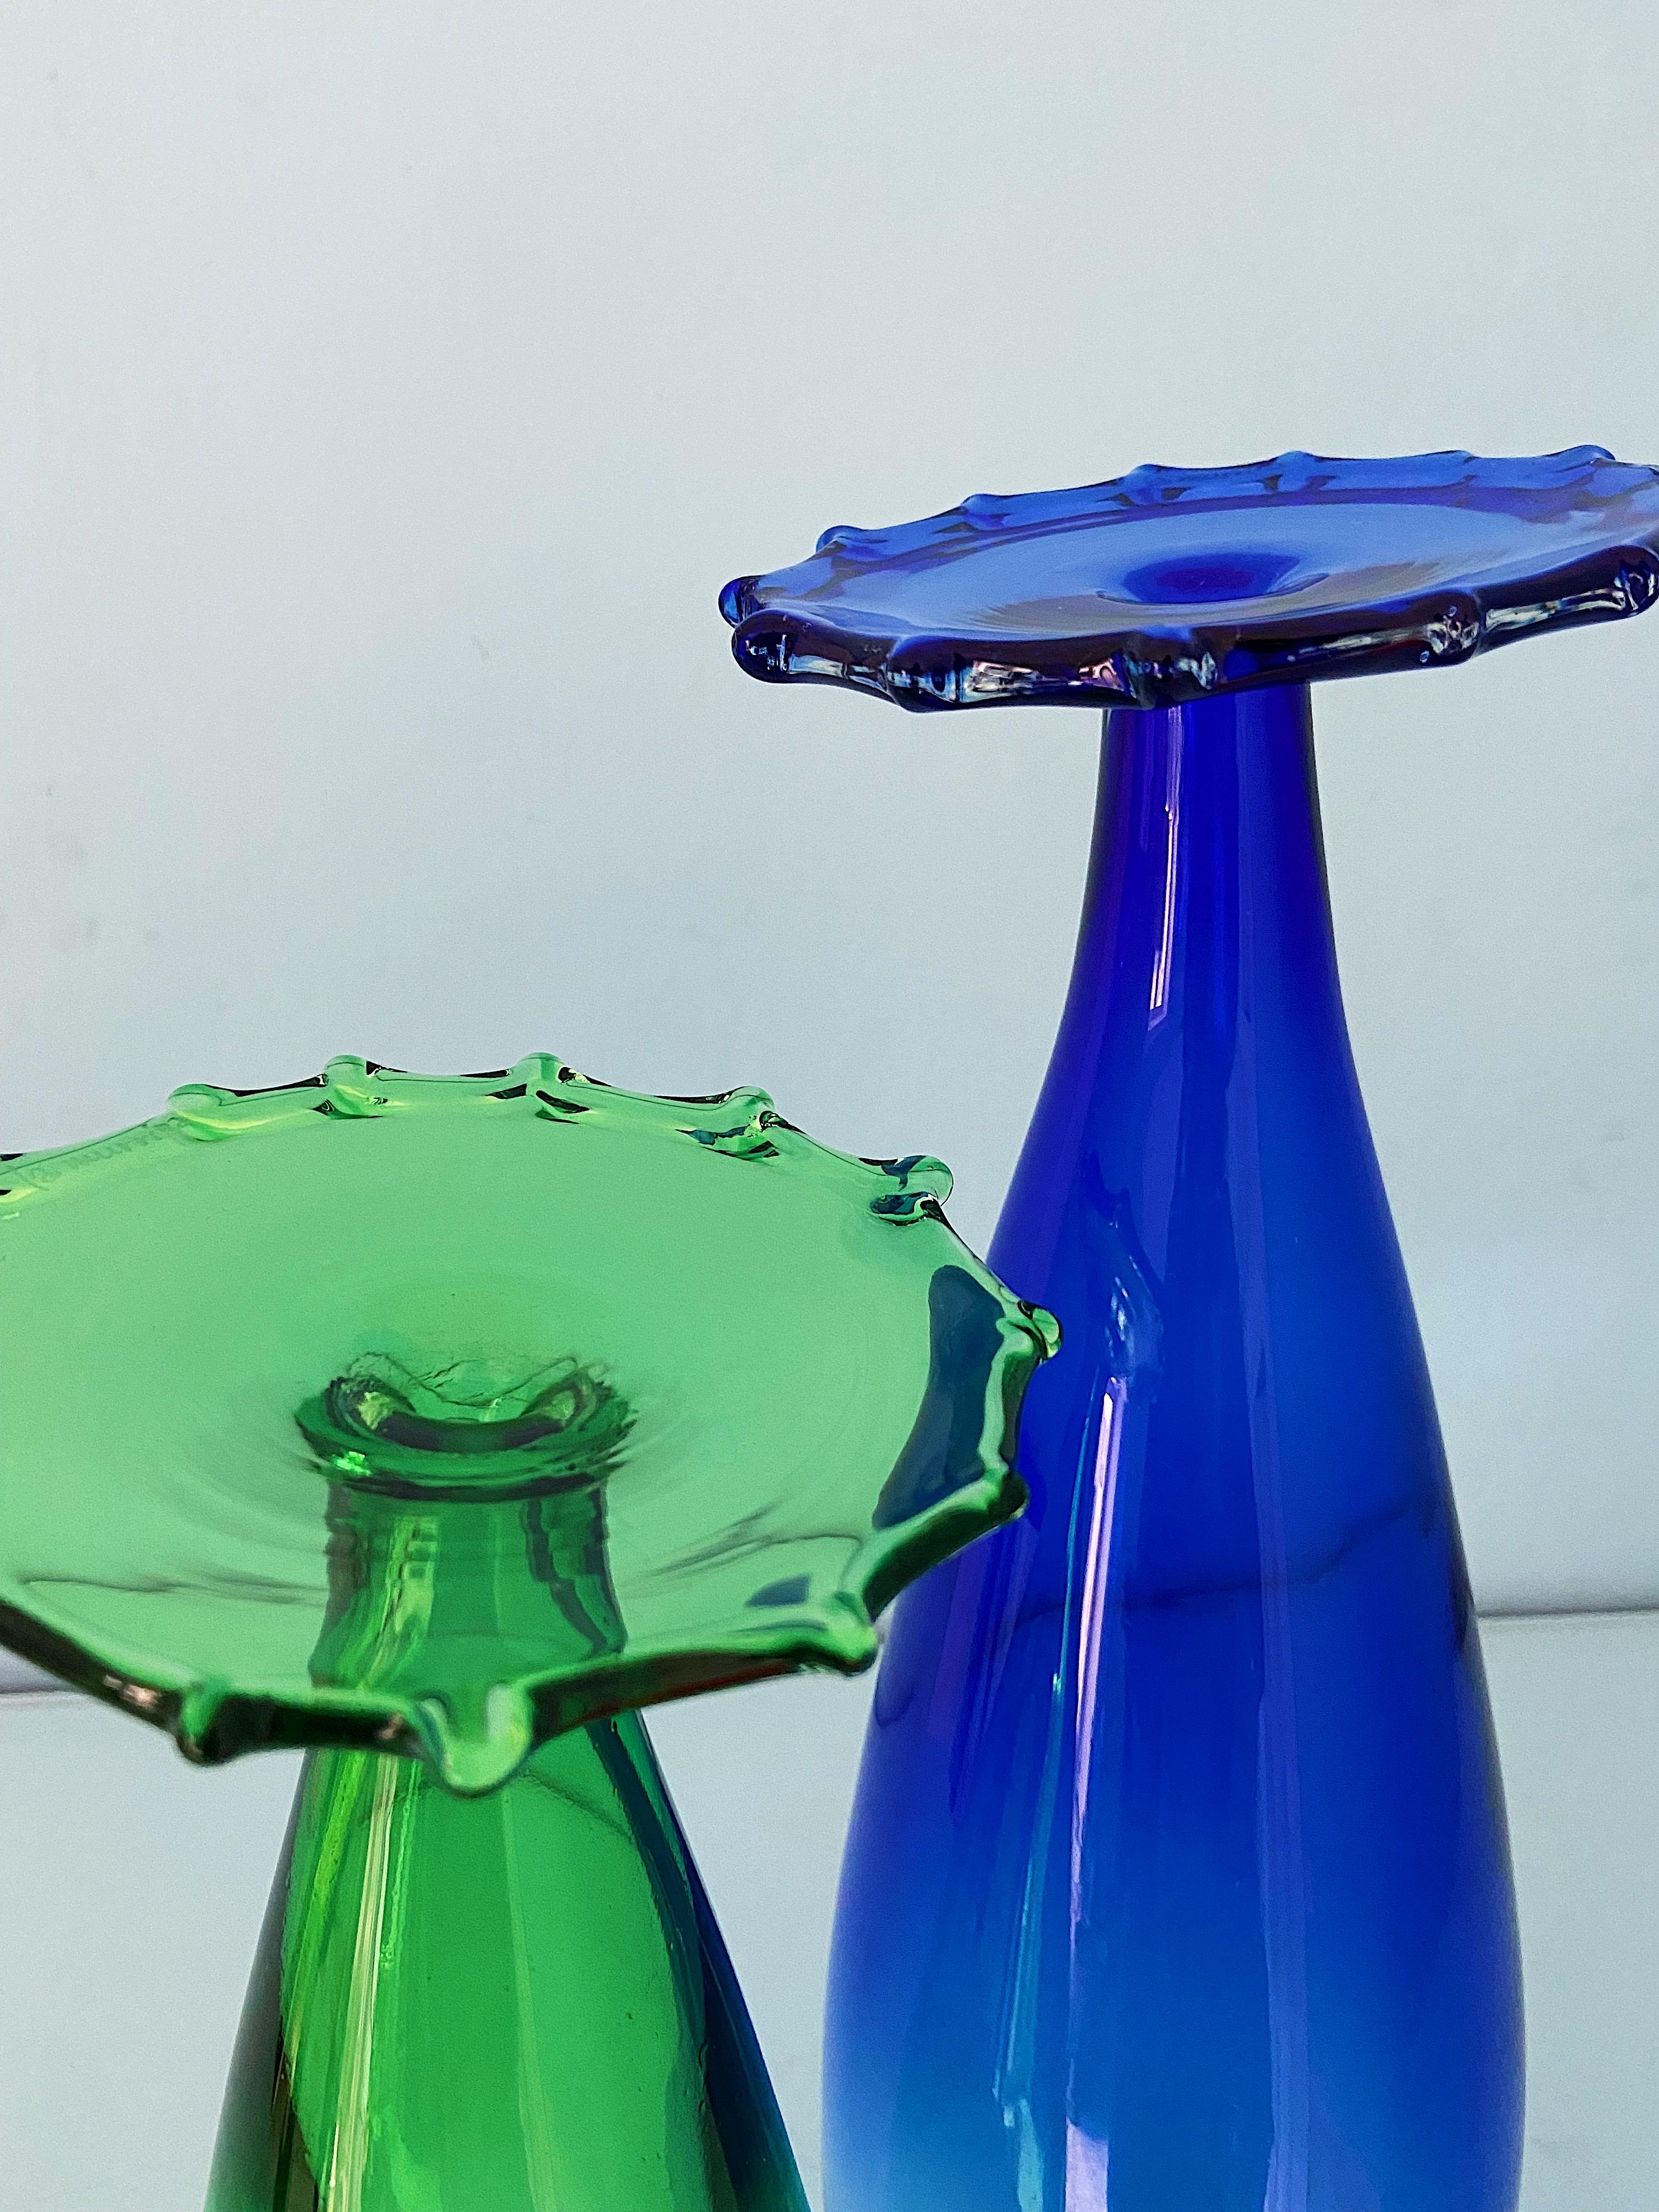 Pair of Mid-Century Modern Vases by La Murrina, 1970s For Sale 3